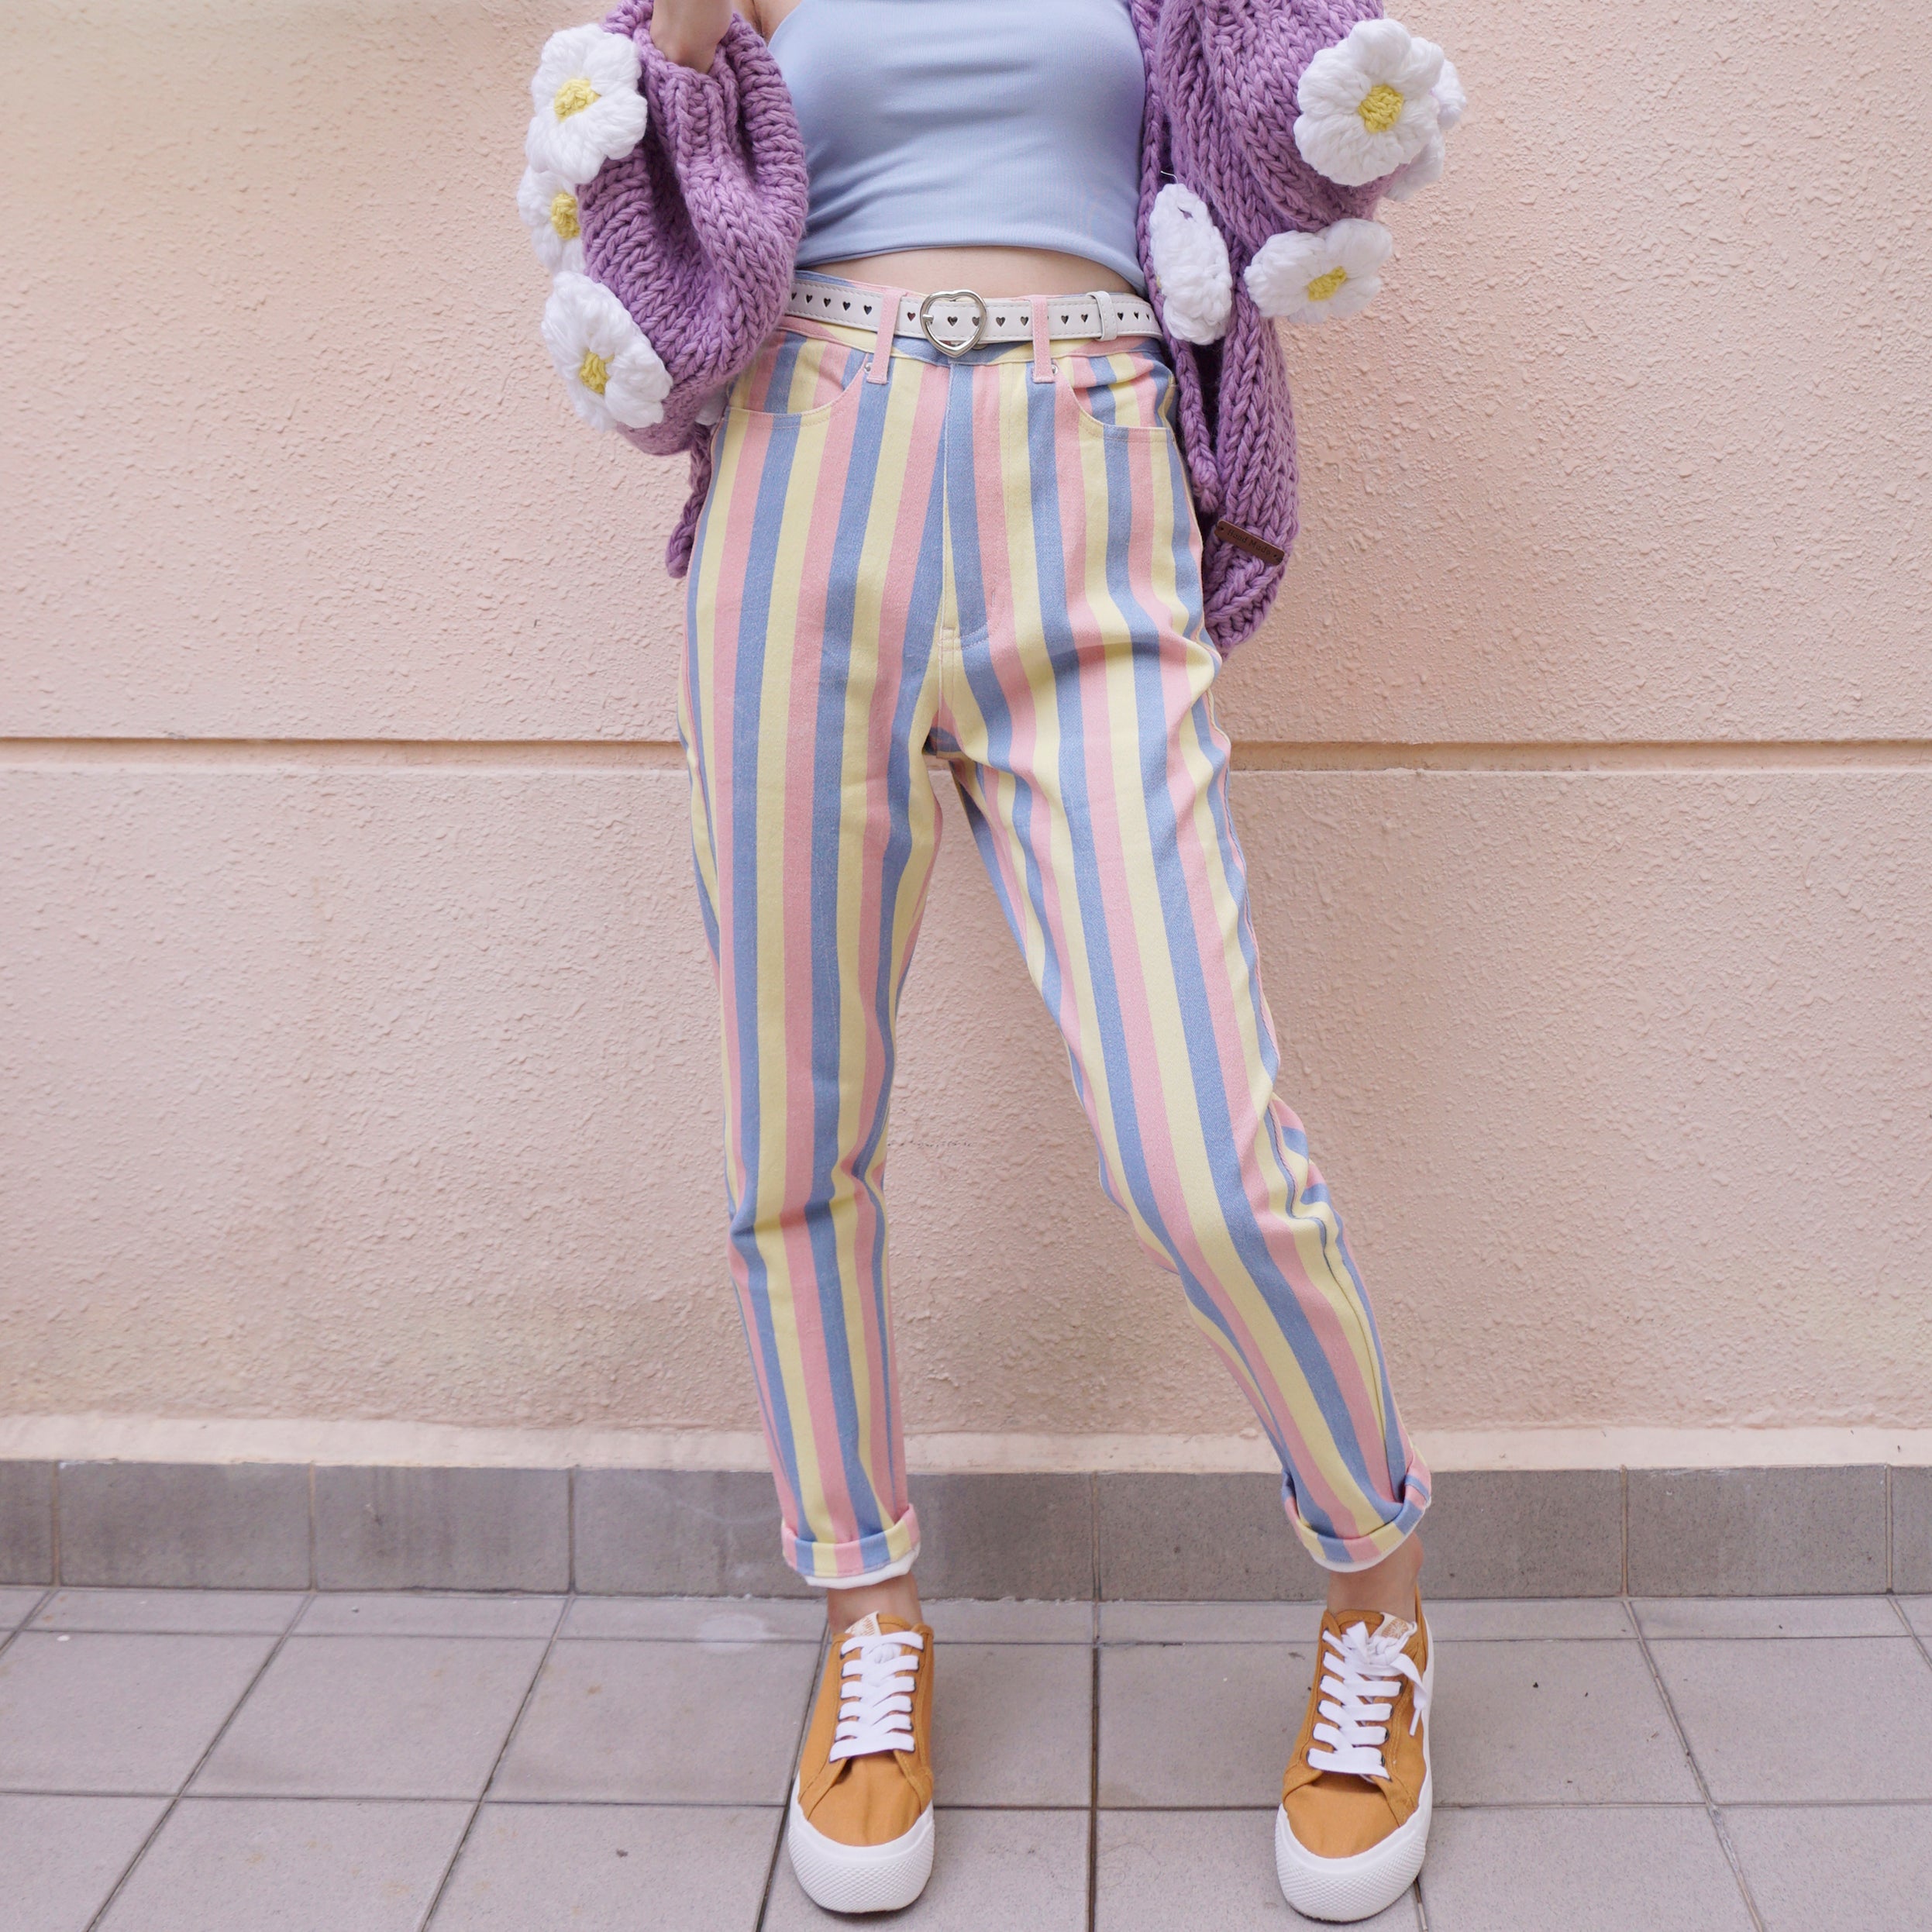 Striped Pants Urban Outfitters Deals - tundraecology.hi.is 1694280361